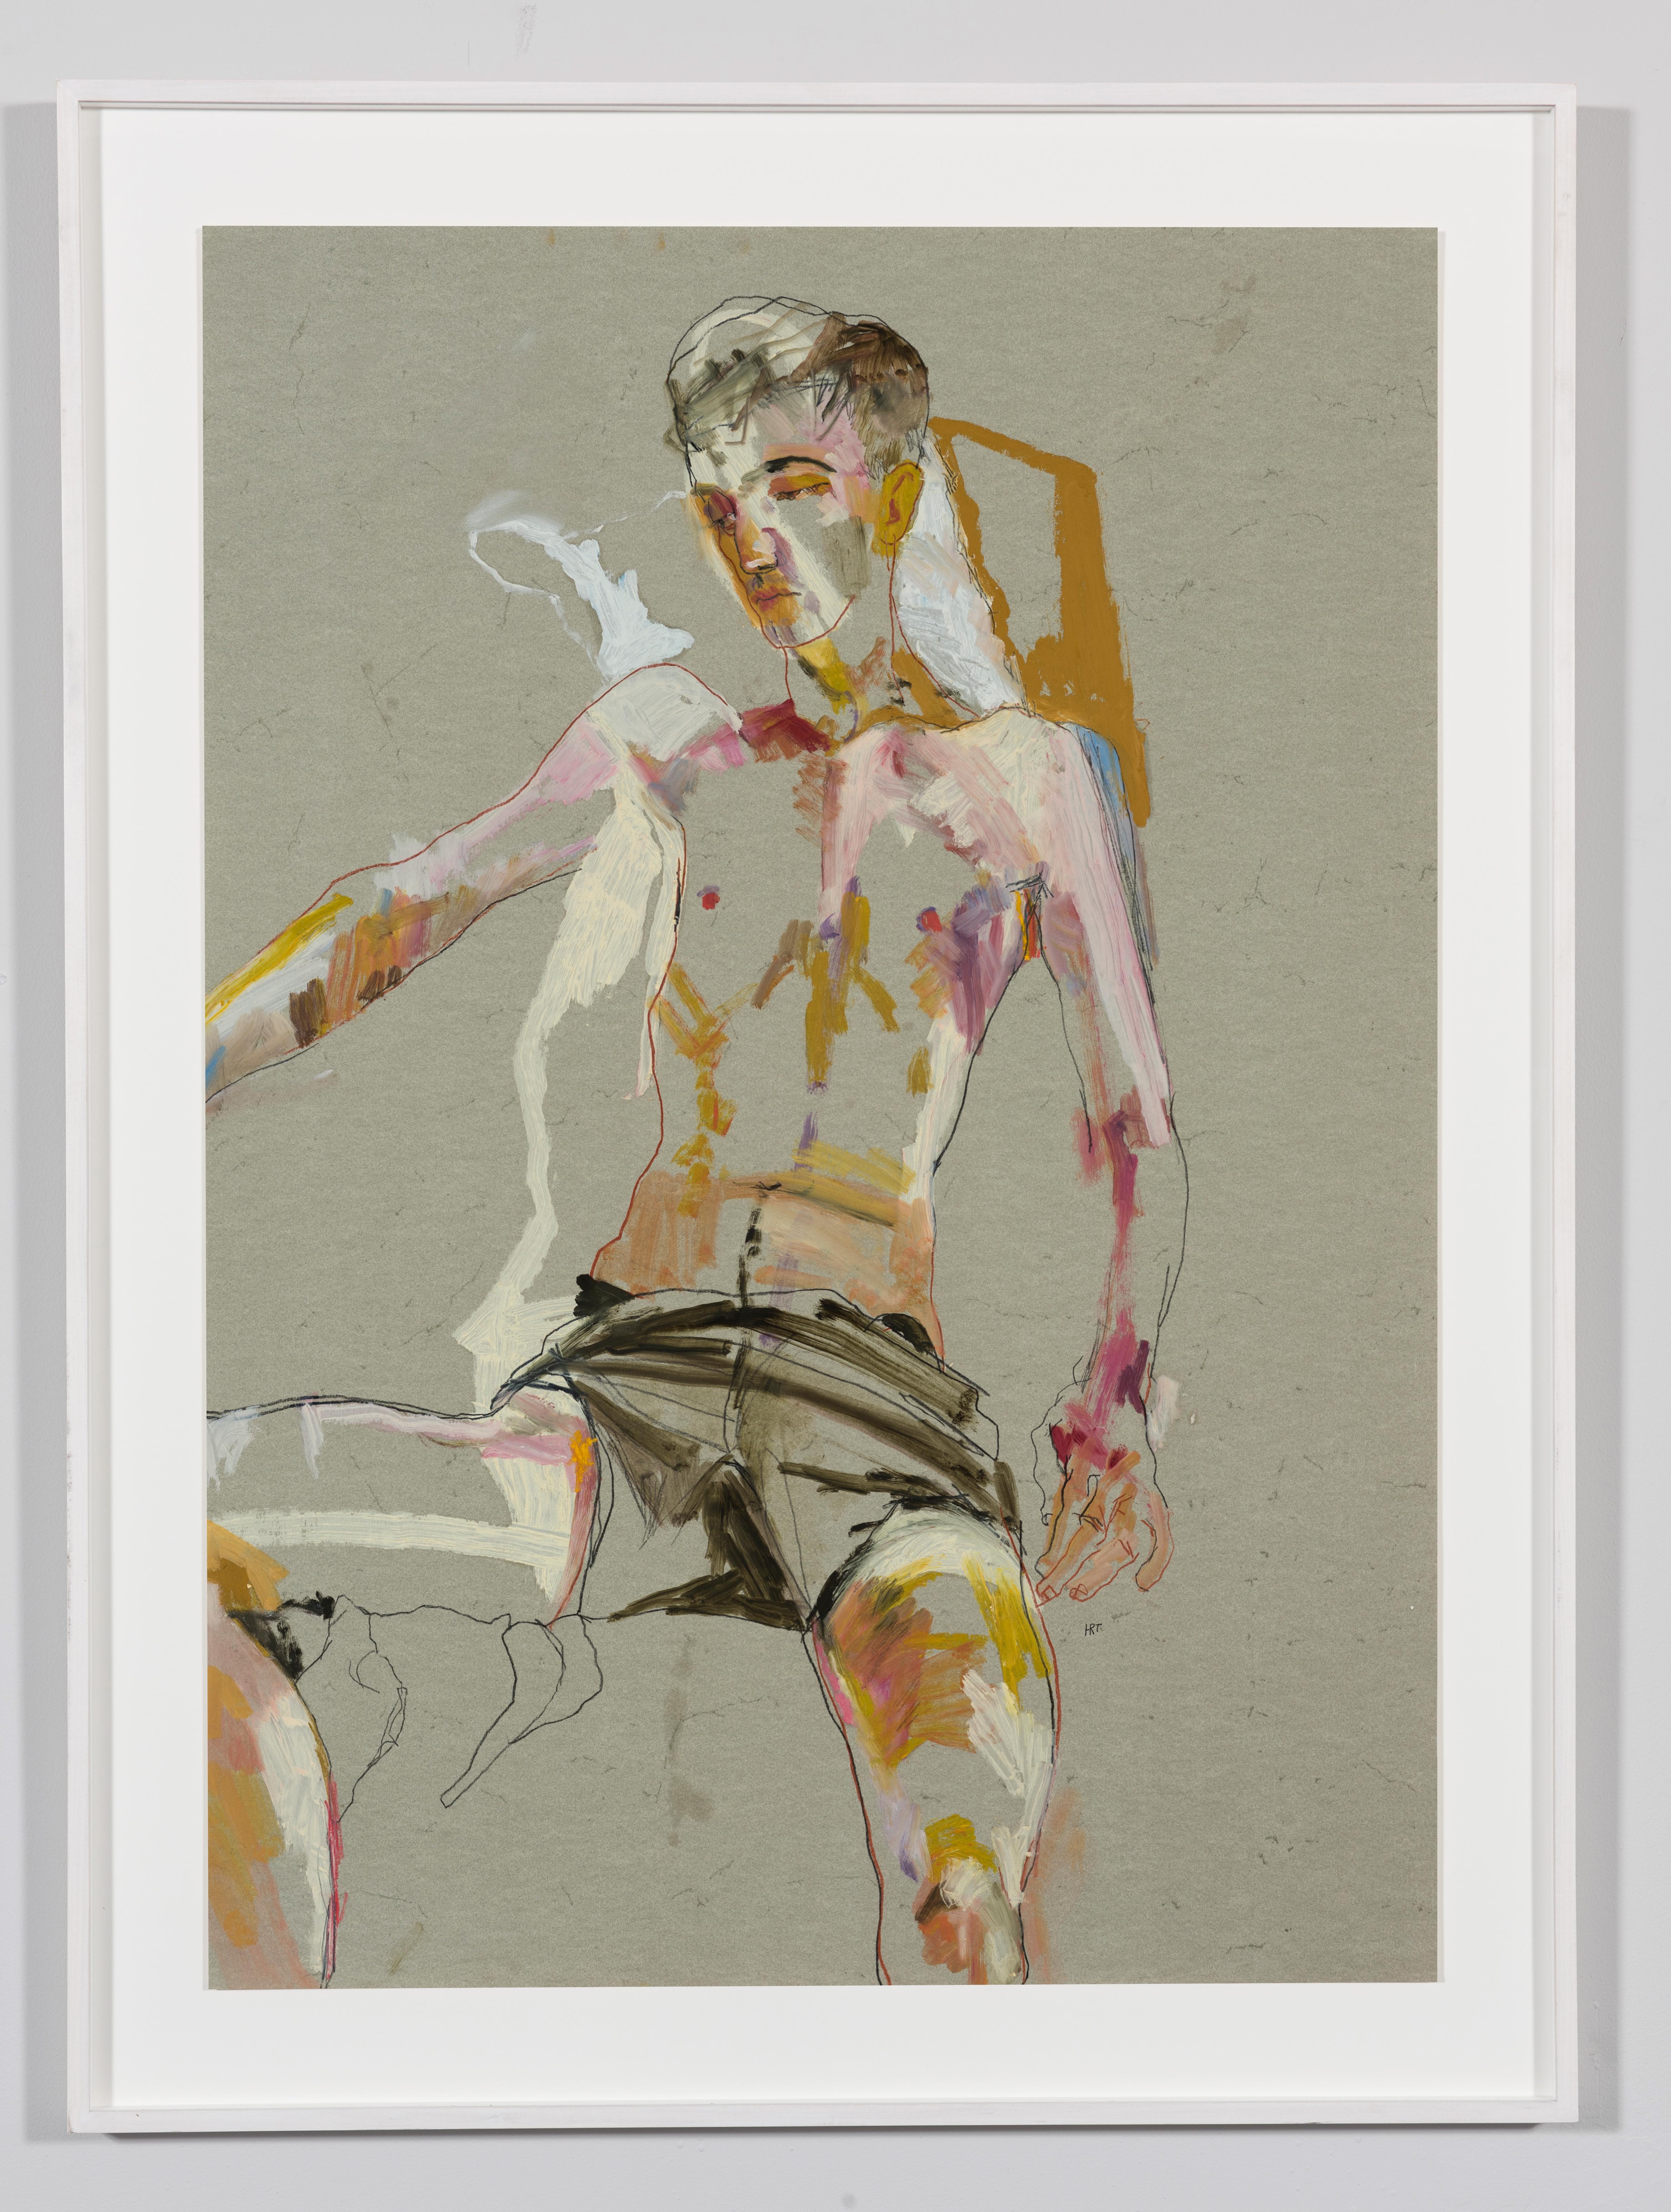 Andrew (Sitting, Arms Open - Black Shorts), Mixed media on grey parchment - Art by Howard Tangye